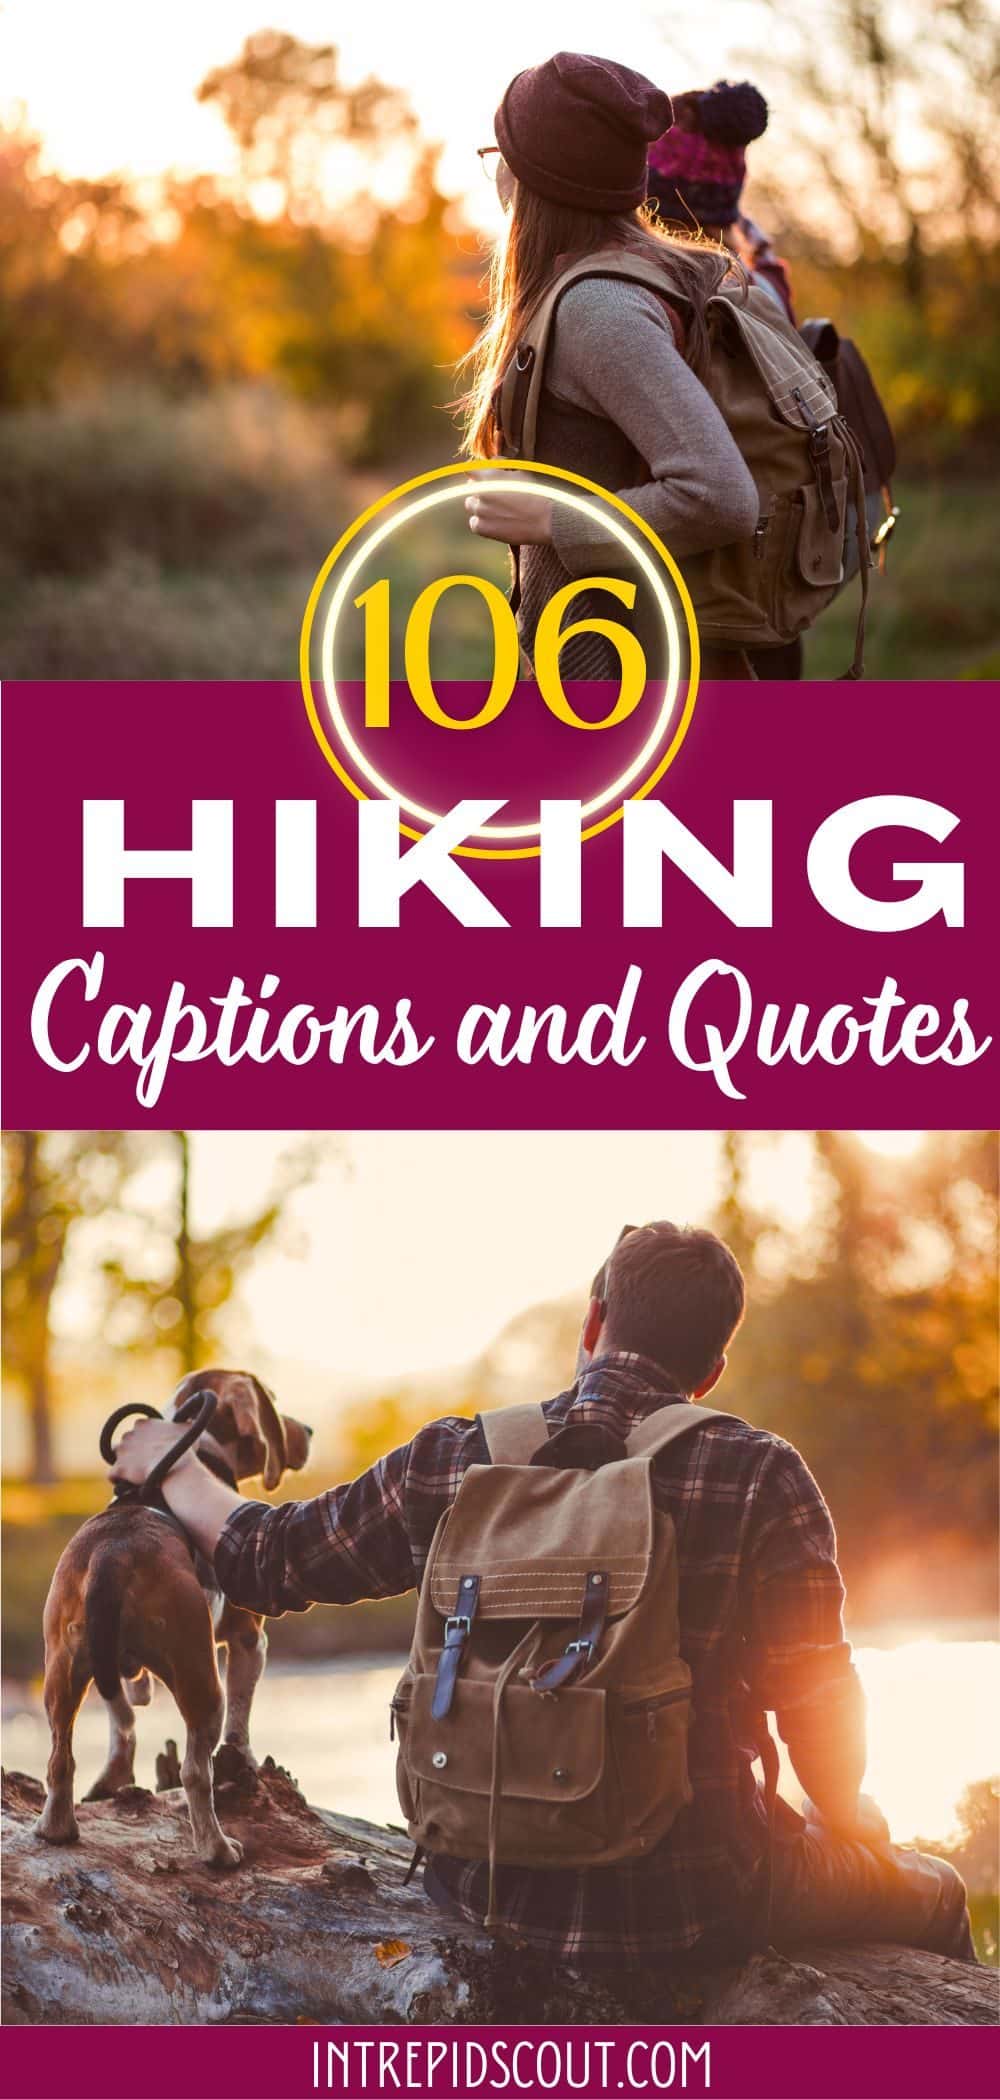 Hiking Captions and Quotes